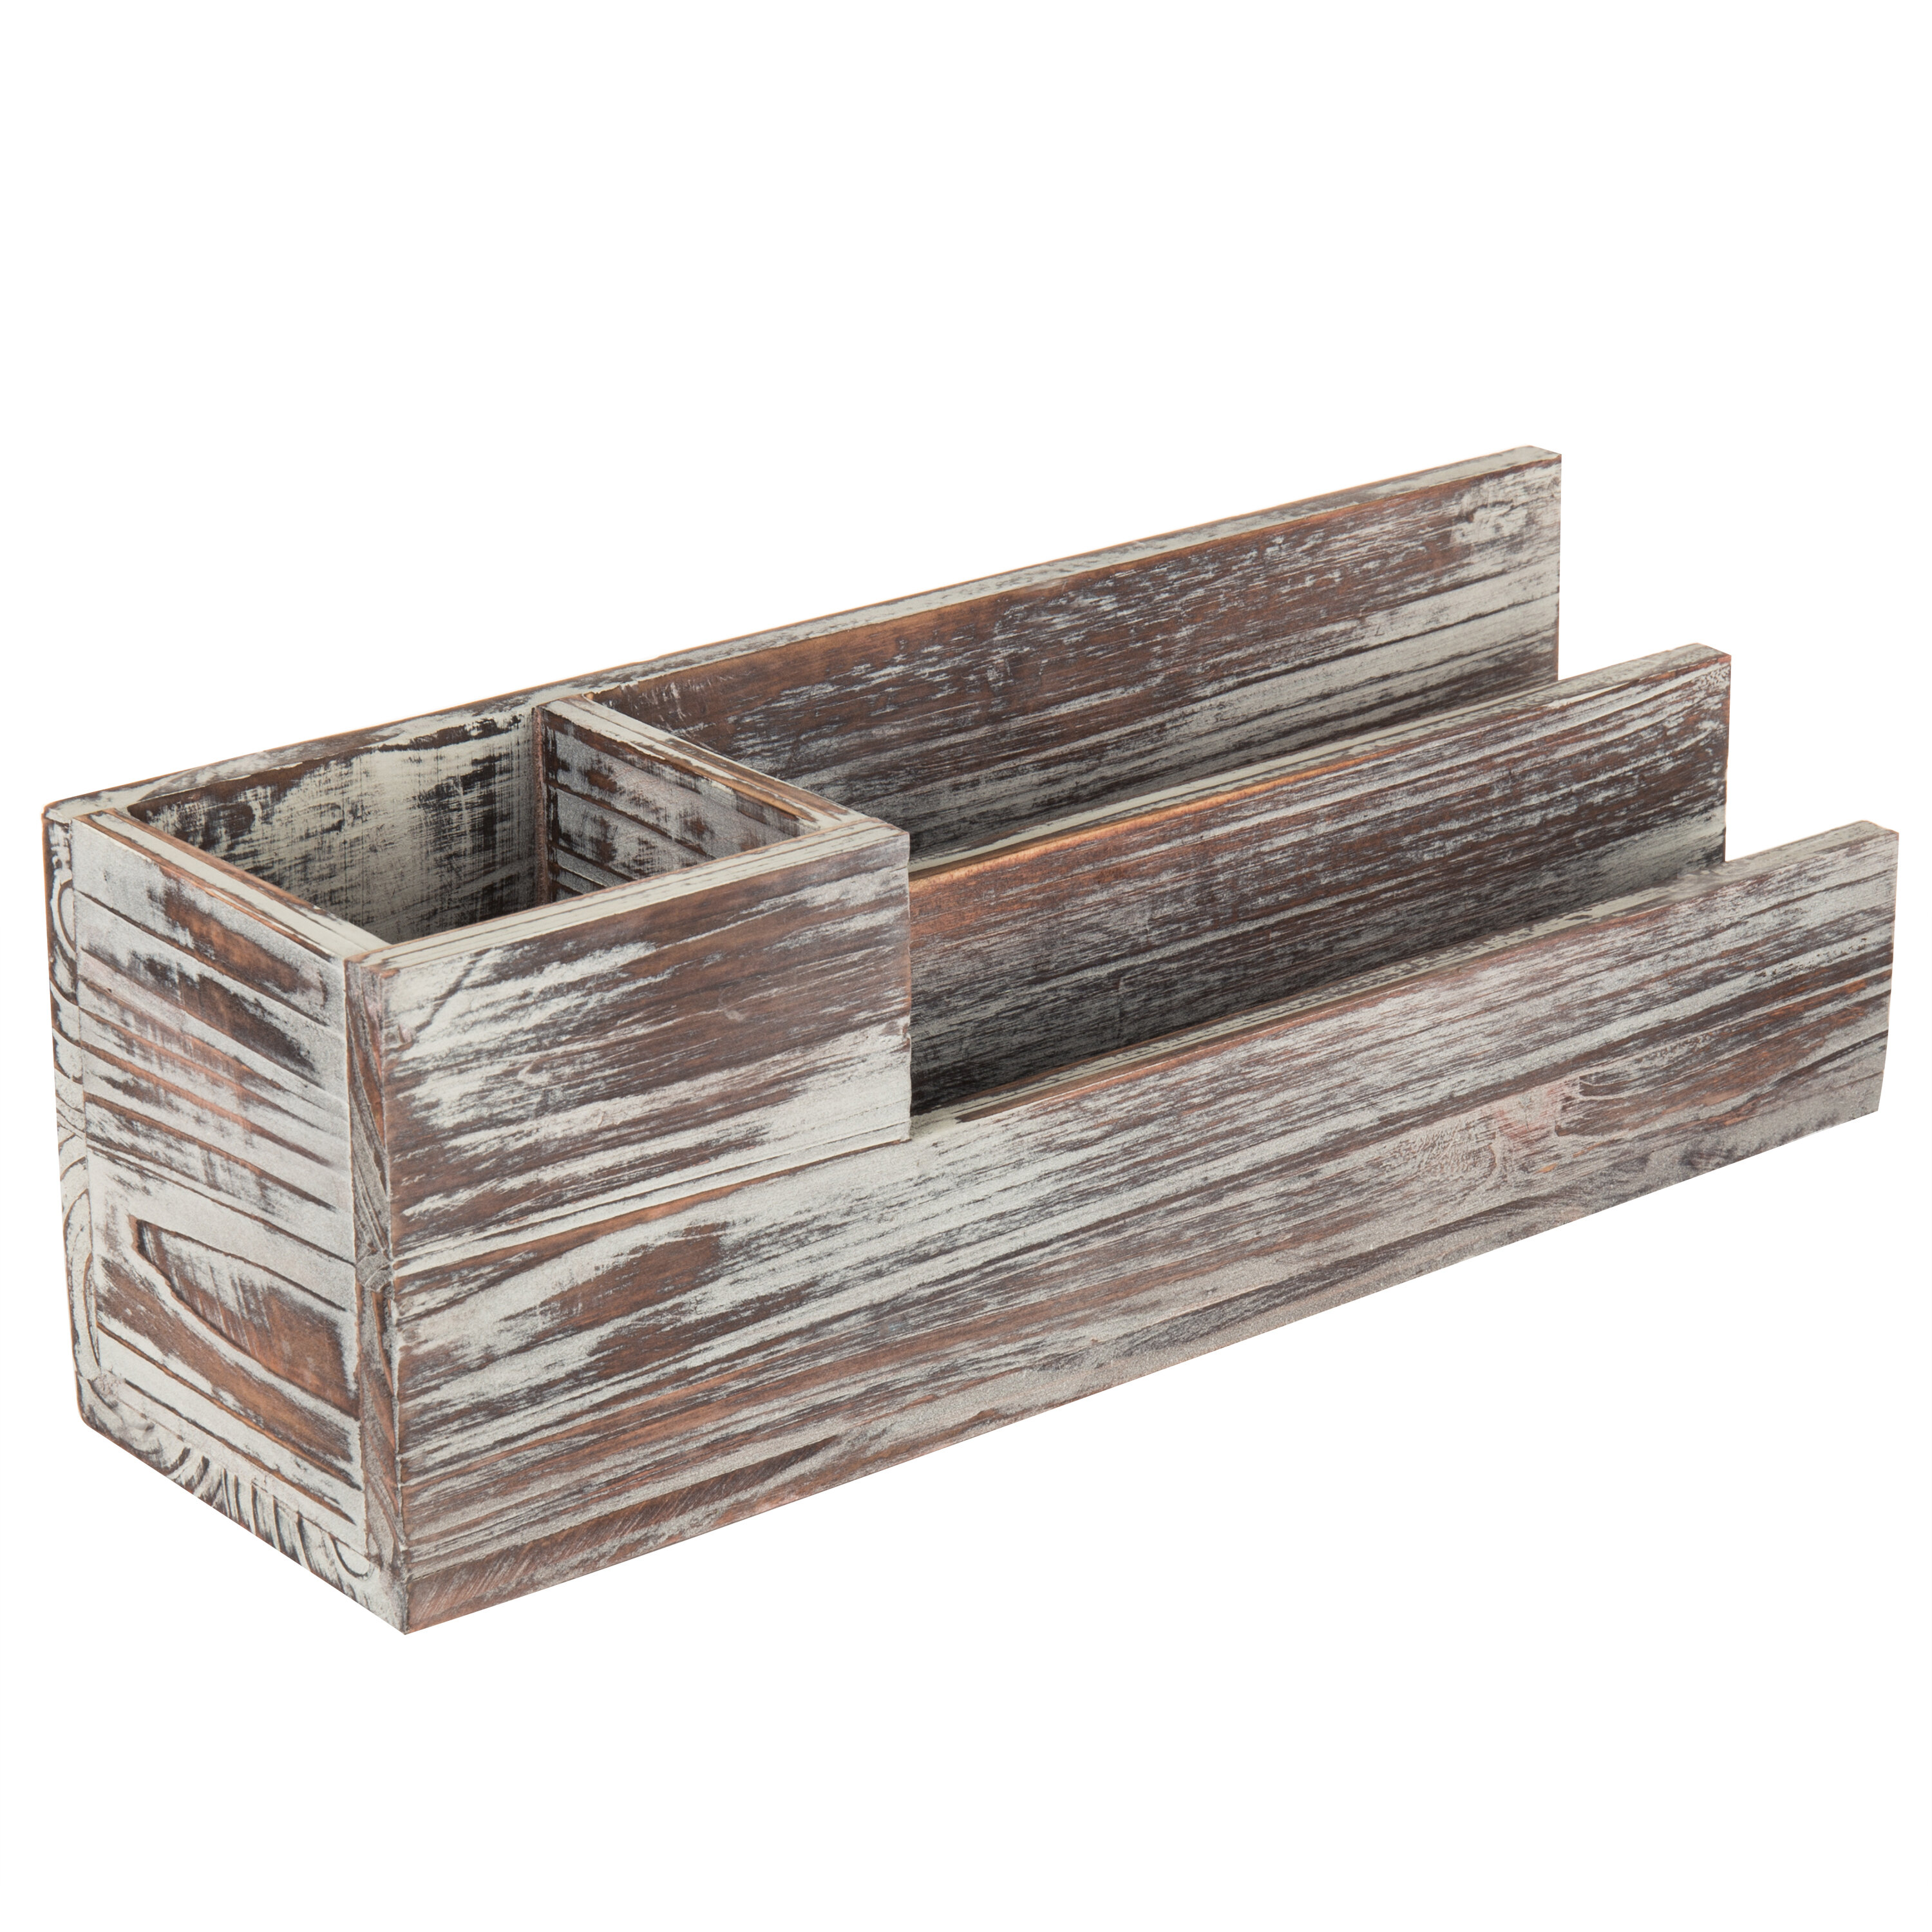 Rustic Whitewashed Gray Wood Office Supplies Caddy &2 Slot Letter Mail Organizer 